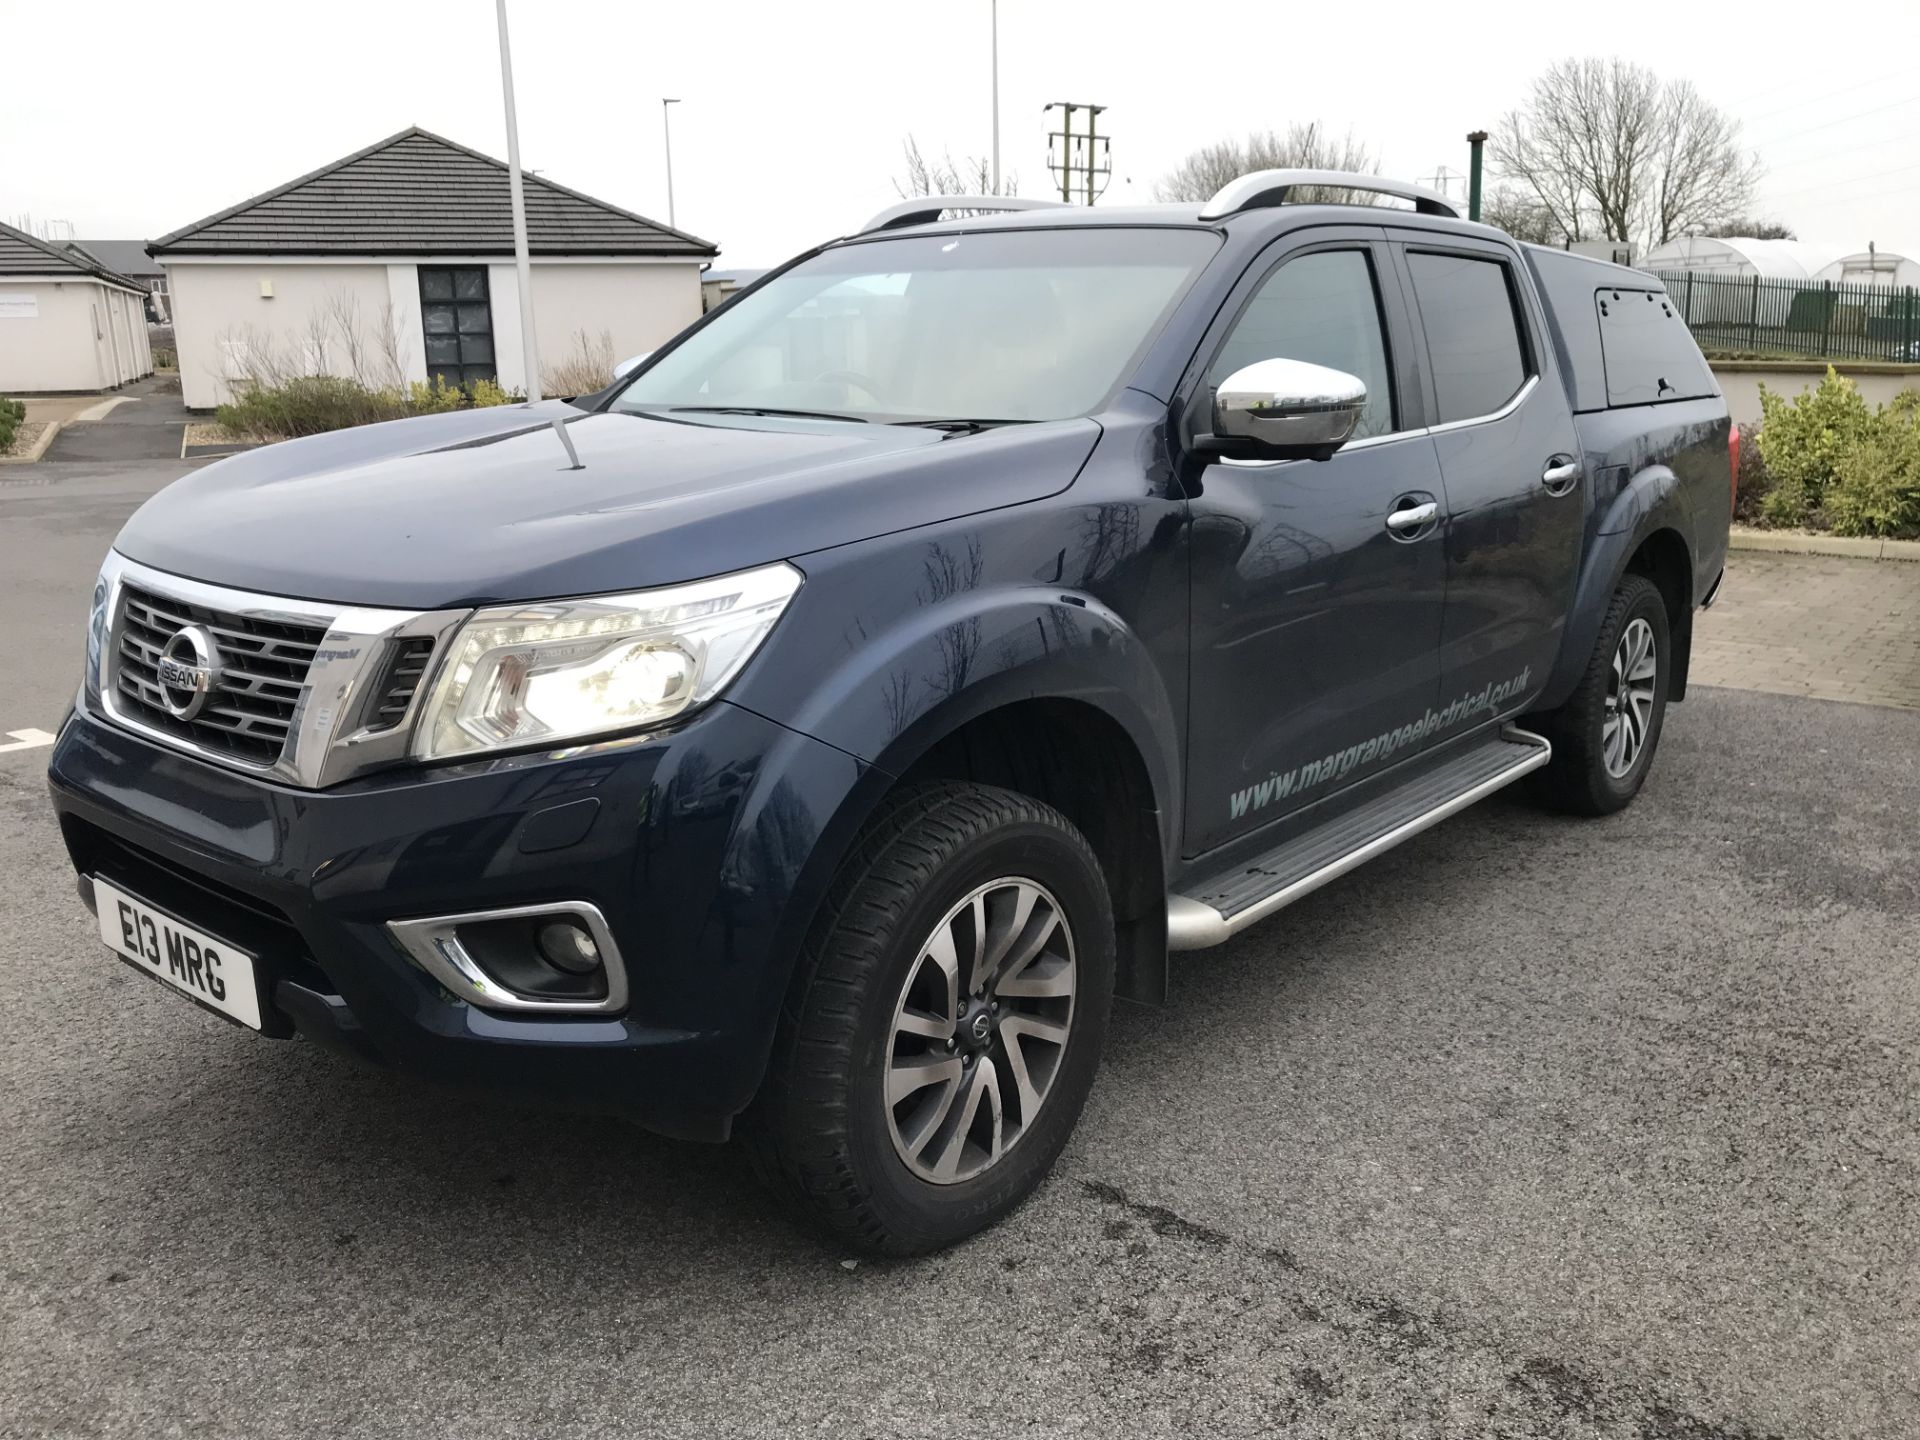 Nissan Navara Tekna 2.3dCi 190 4WD Auto Double Cab Pick Up, registration no. E13 MRG, date first - Image 2 of 9